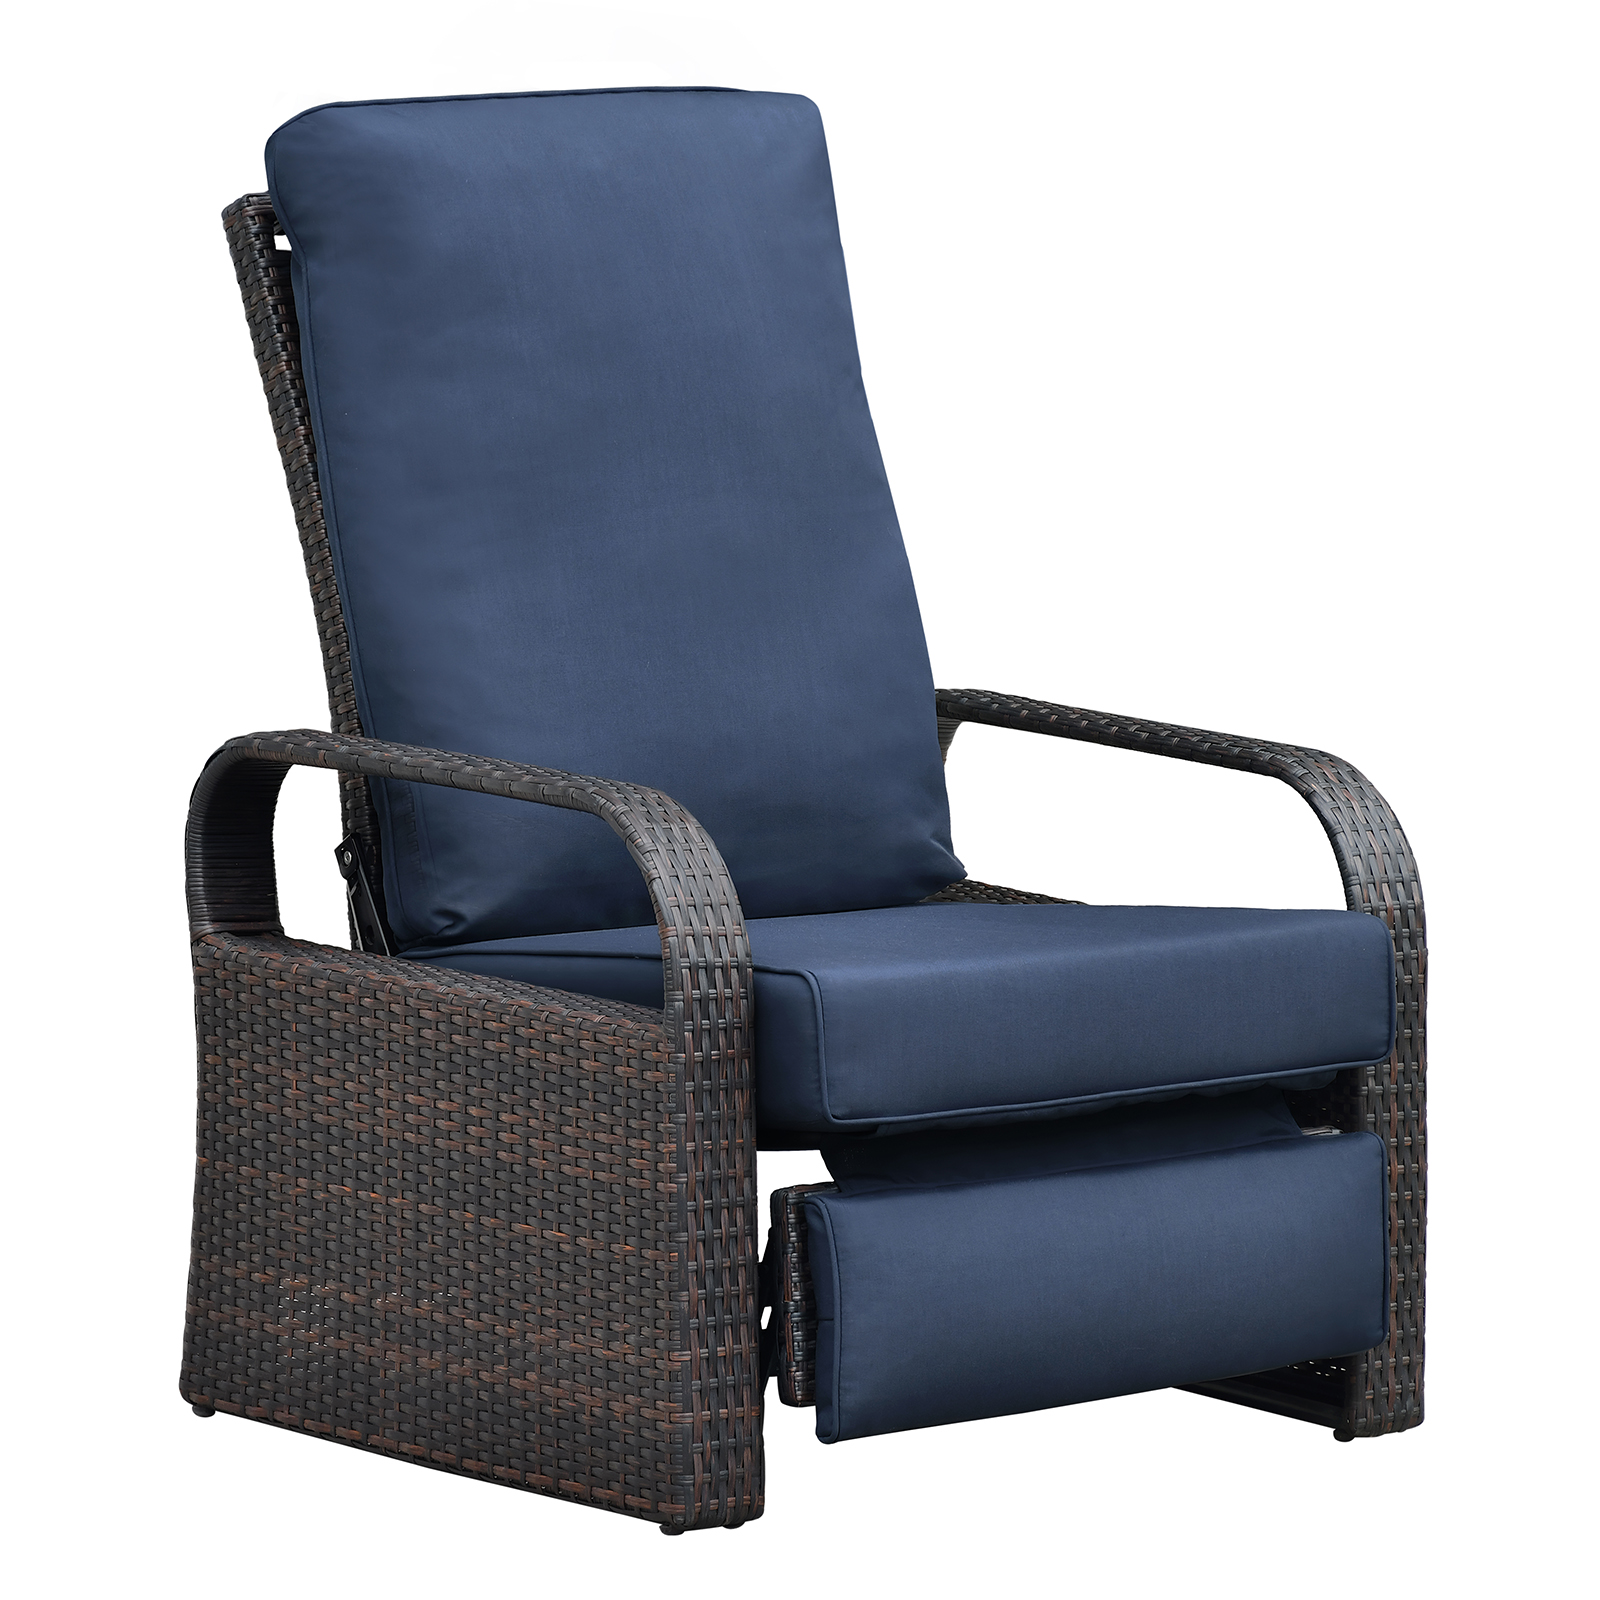 ATR ART to REAL Outdoor Patio Rattan Wicker Adjustable Recliner Chair with Cushion,Dark Blue - image 5 of 11